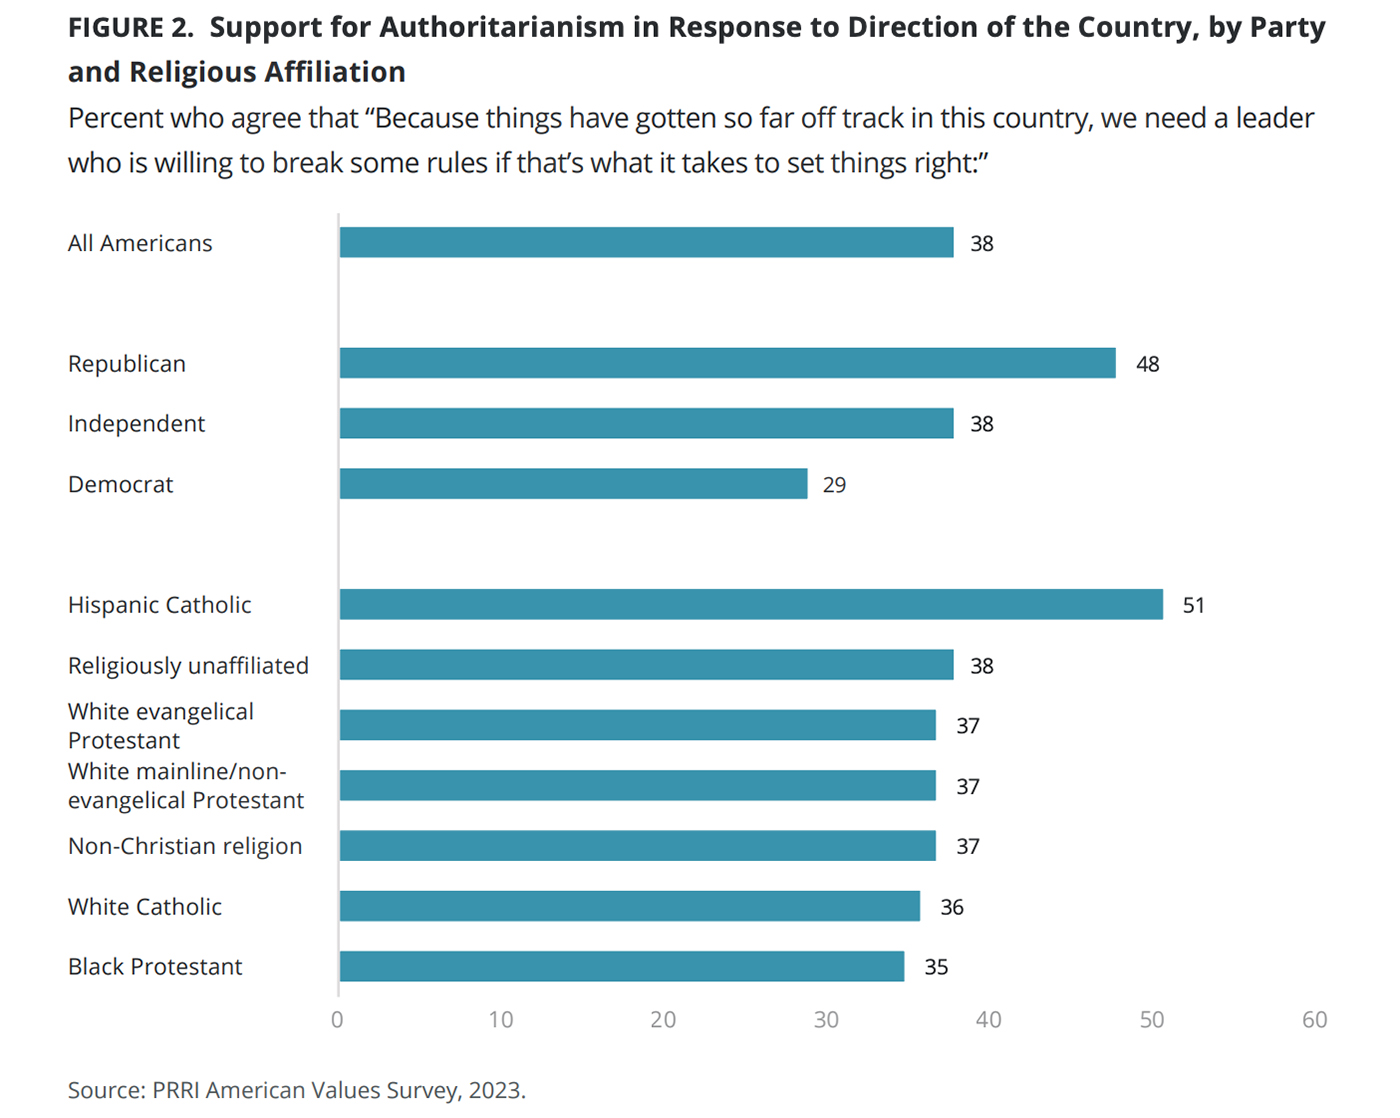 "Support for Authoritarianism in Response to Direction of the Country, by Party and Religious Affiliation" Graphic courtesy PRRI